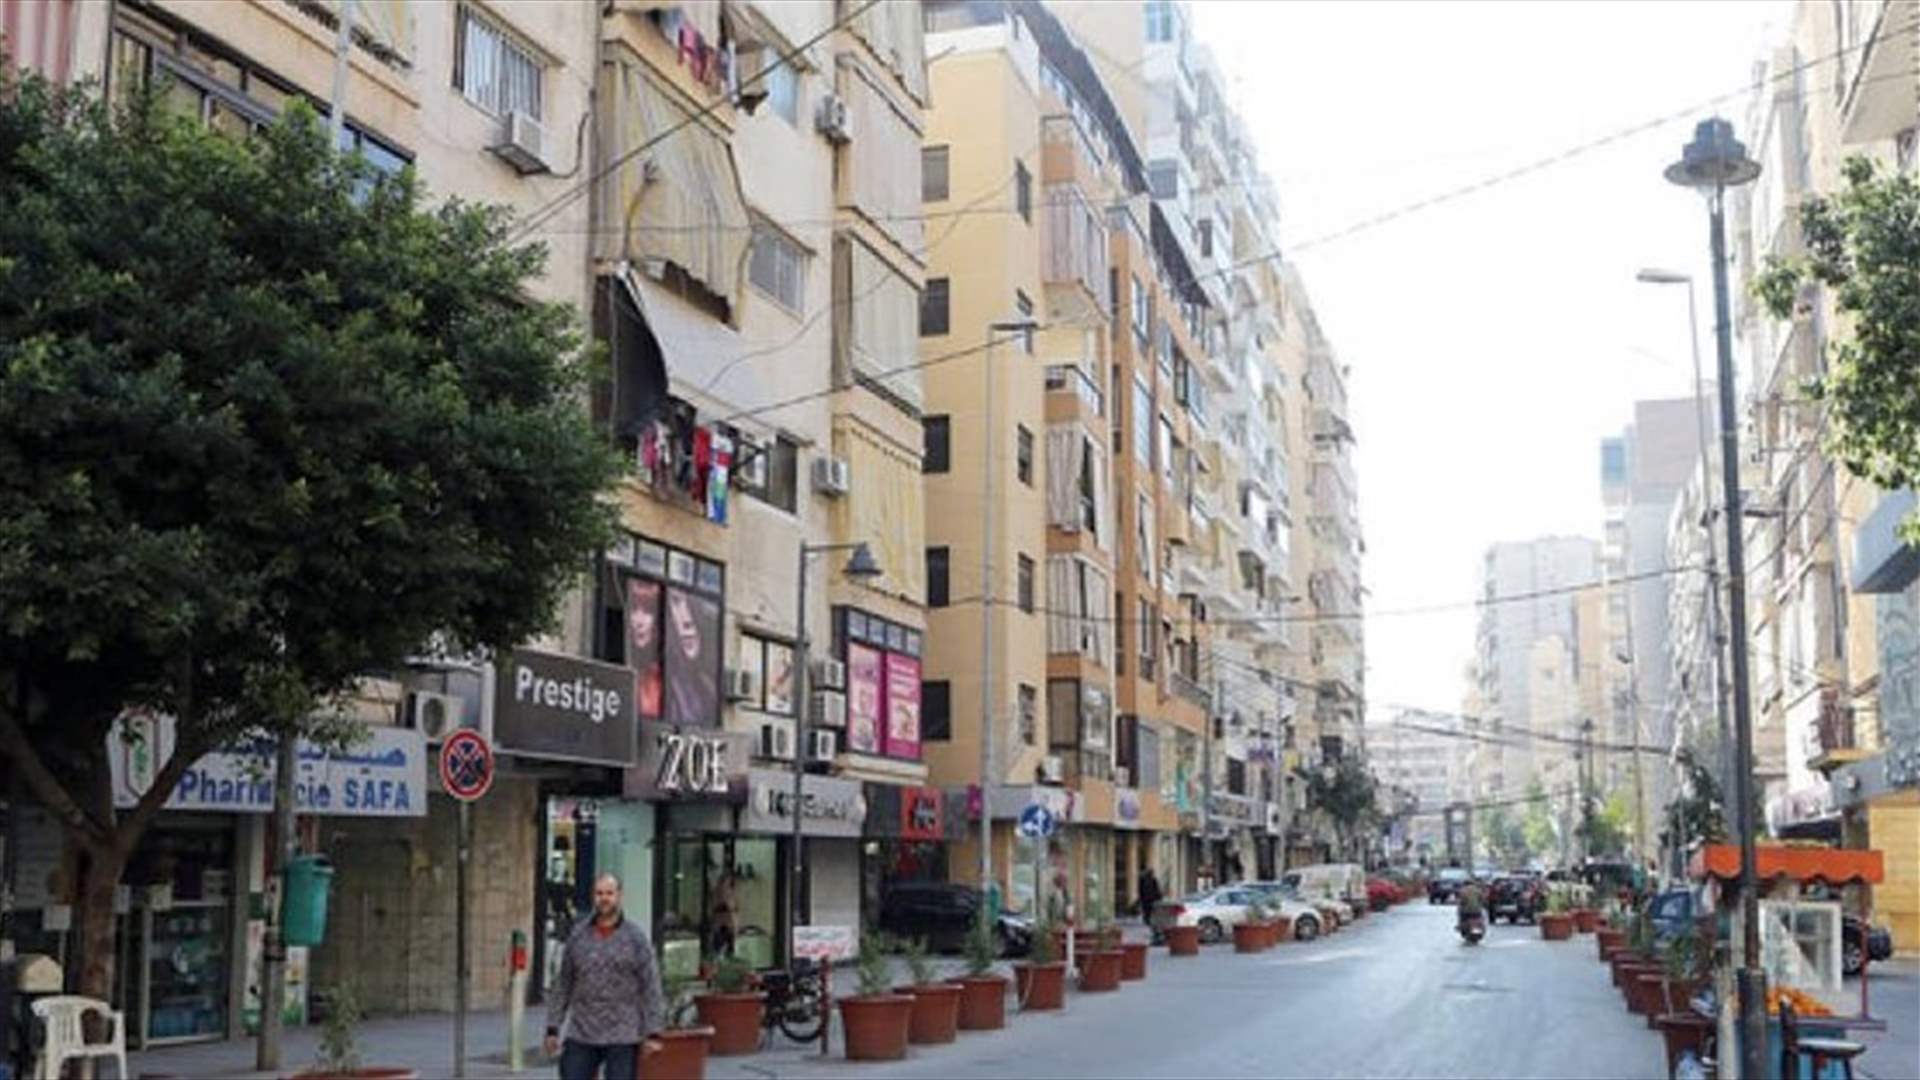 Spanish diplomat detained: Security incident in Beirut&#39;s southern suburb